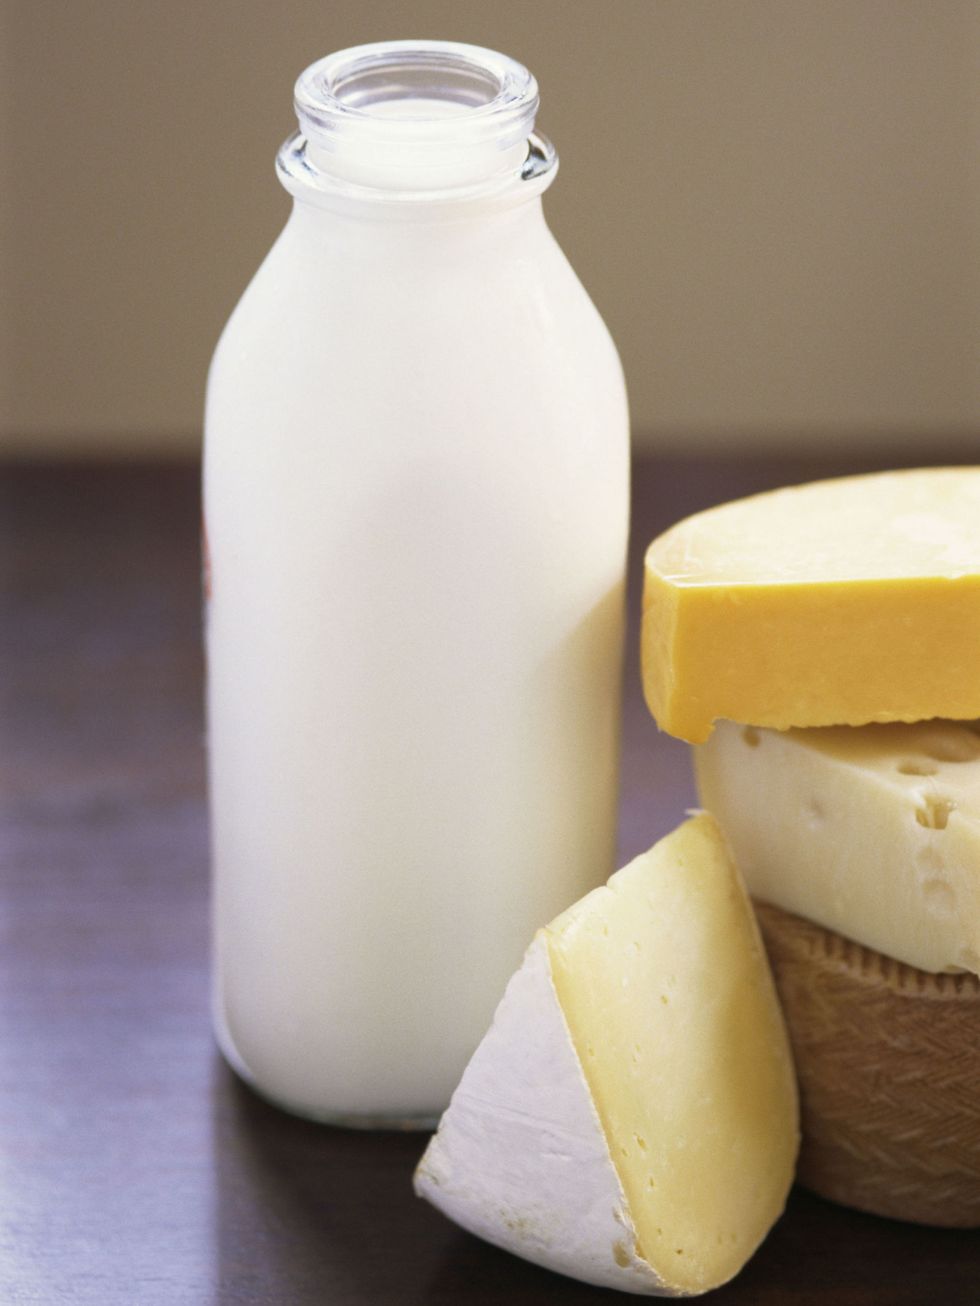 <p>Cheese, please. <a href="http://care.diabetesjournals.org/content/30/3/485.full">Research</a> has shown that a diet rich in calcium from dairy promotes weight loss in type 2 diabetics. Why? Not getting enough calcium may trigger the release of calcitriol, a hormone that causes the body to store extra fat. Another <a href="http://www.ncbi.nlm.nih.gov/pubmed/20227261">study</a> came to a similar conclusion, and added that choosing the low-fat dairy options increases weight loss while still allowing your body to absorb the calcium it needs.&nbsp;</p>